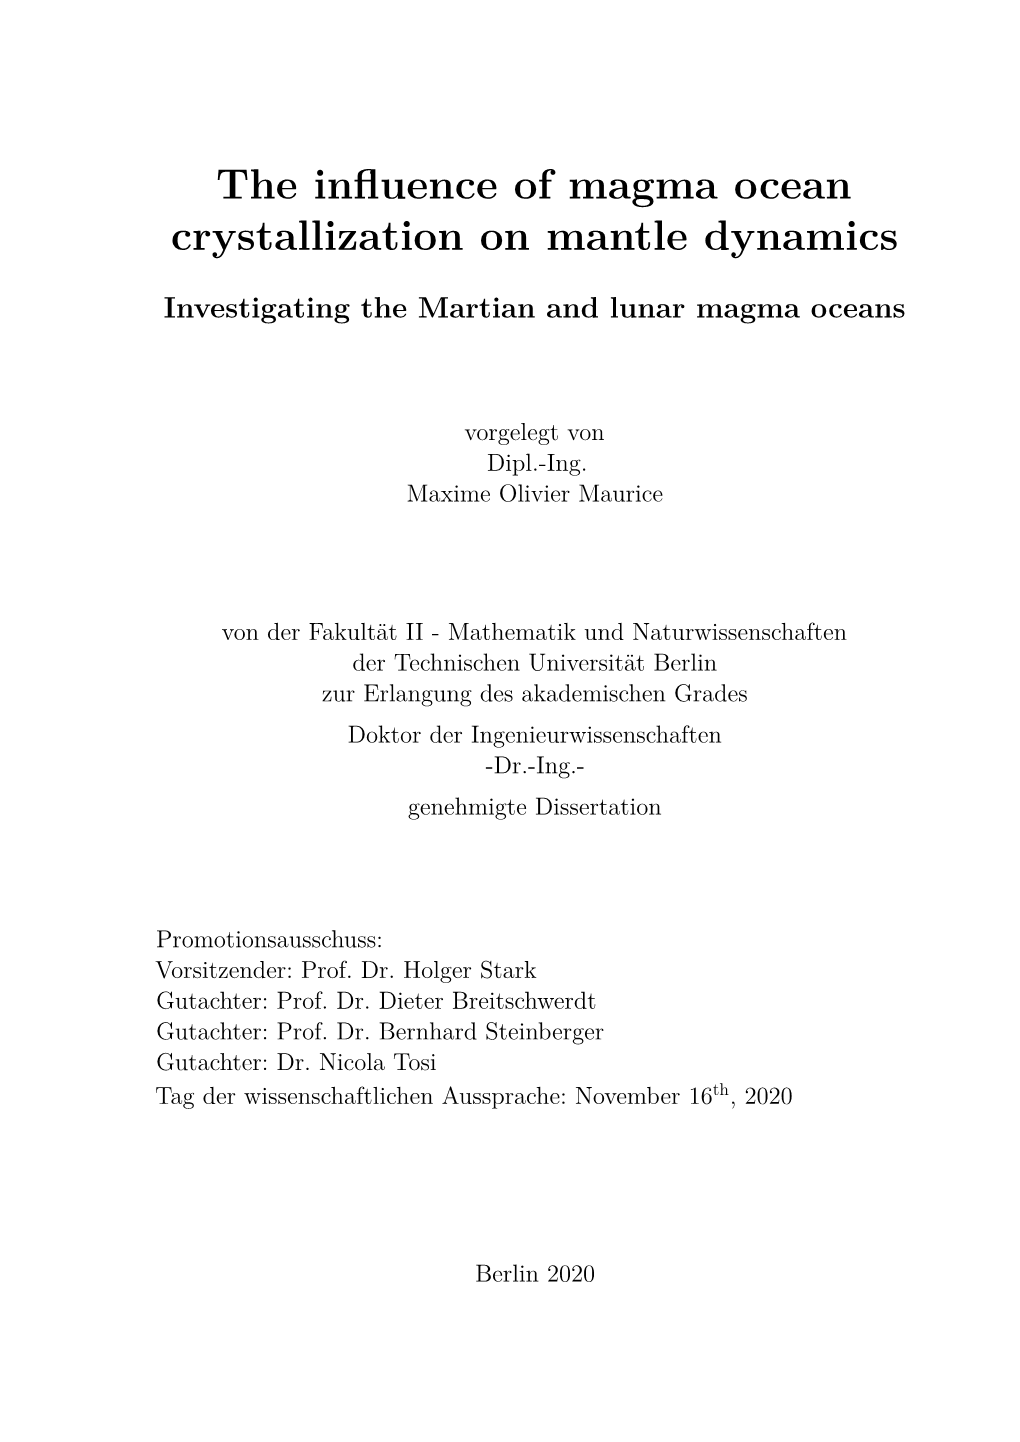 The Influence of Magma Ocean Crystallization on Mantle Dynamics